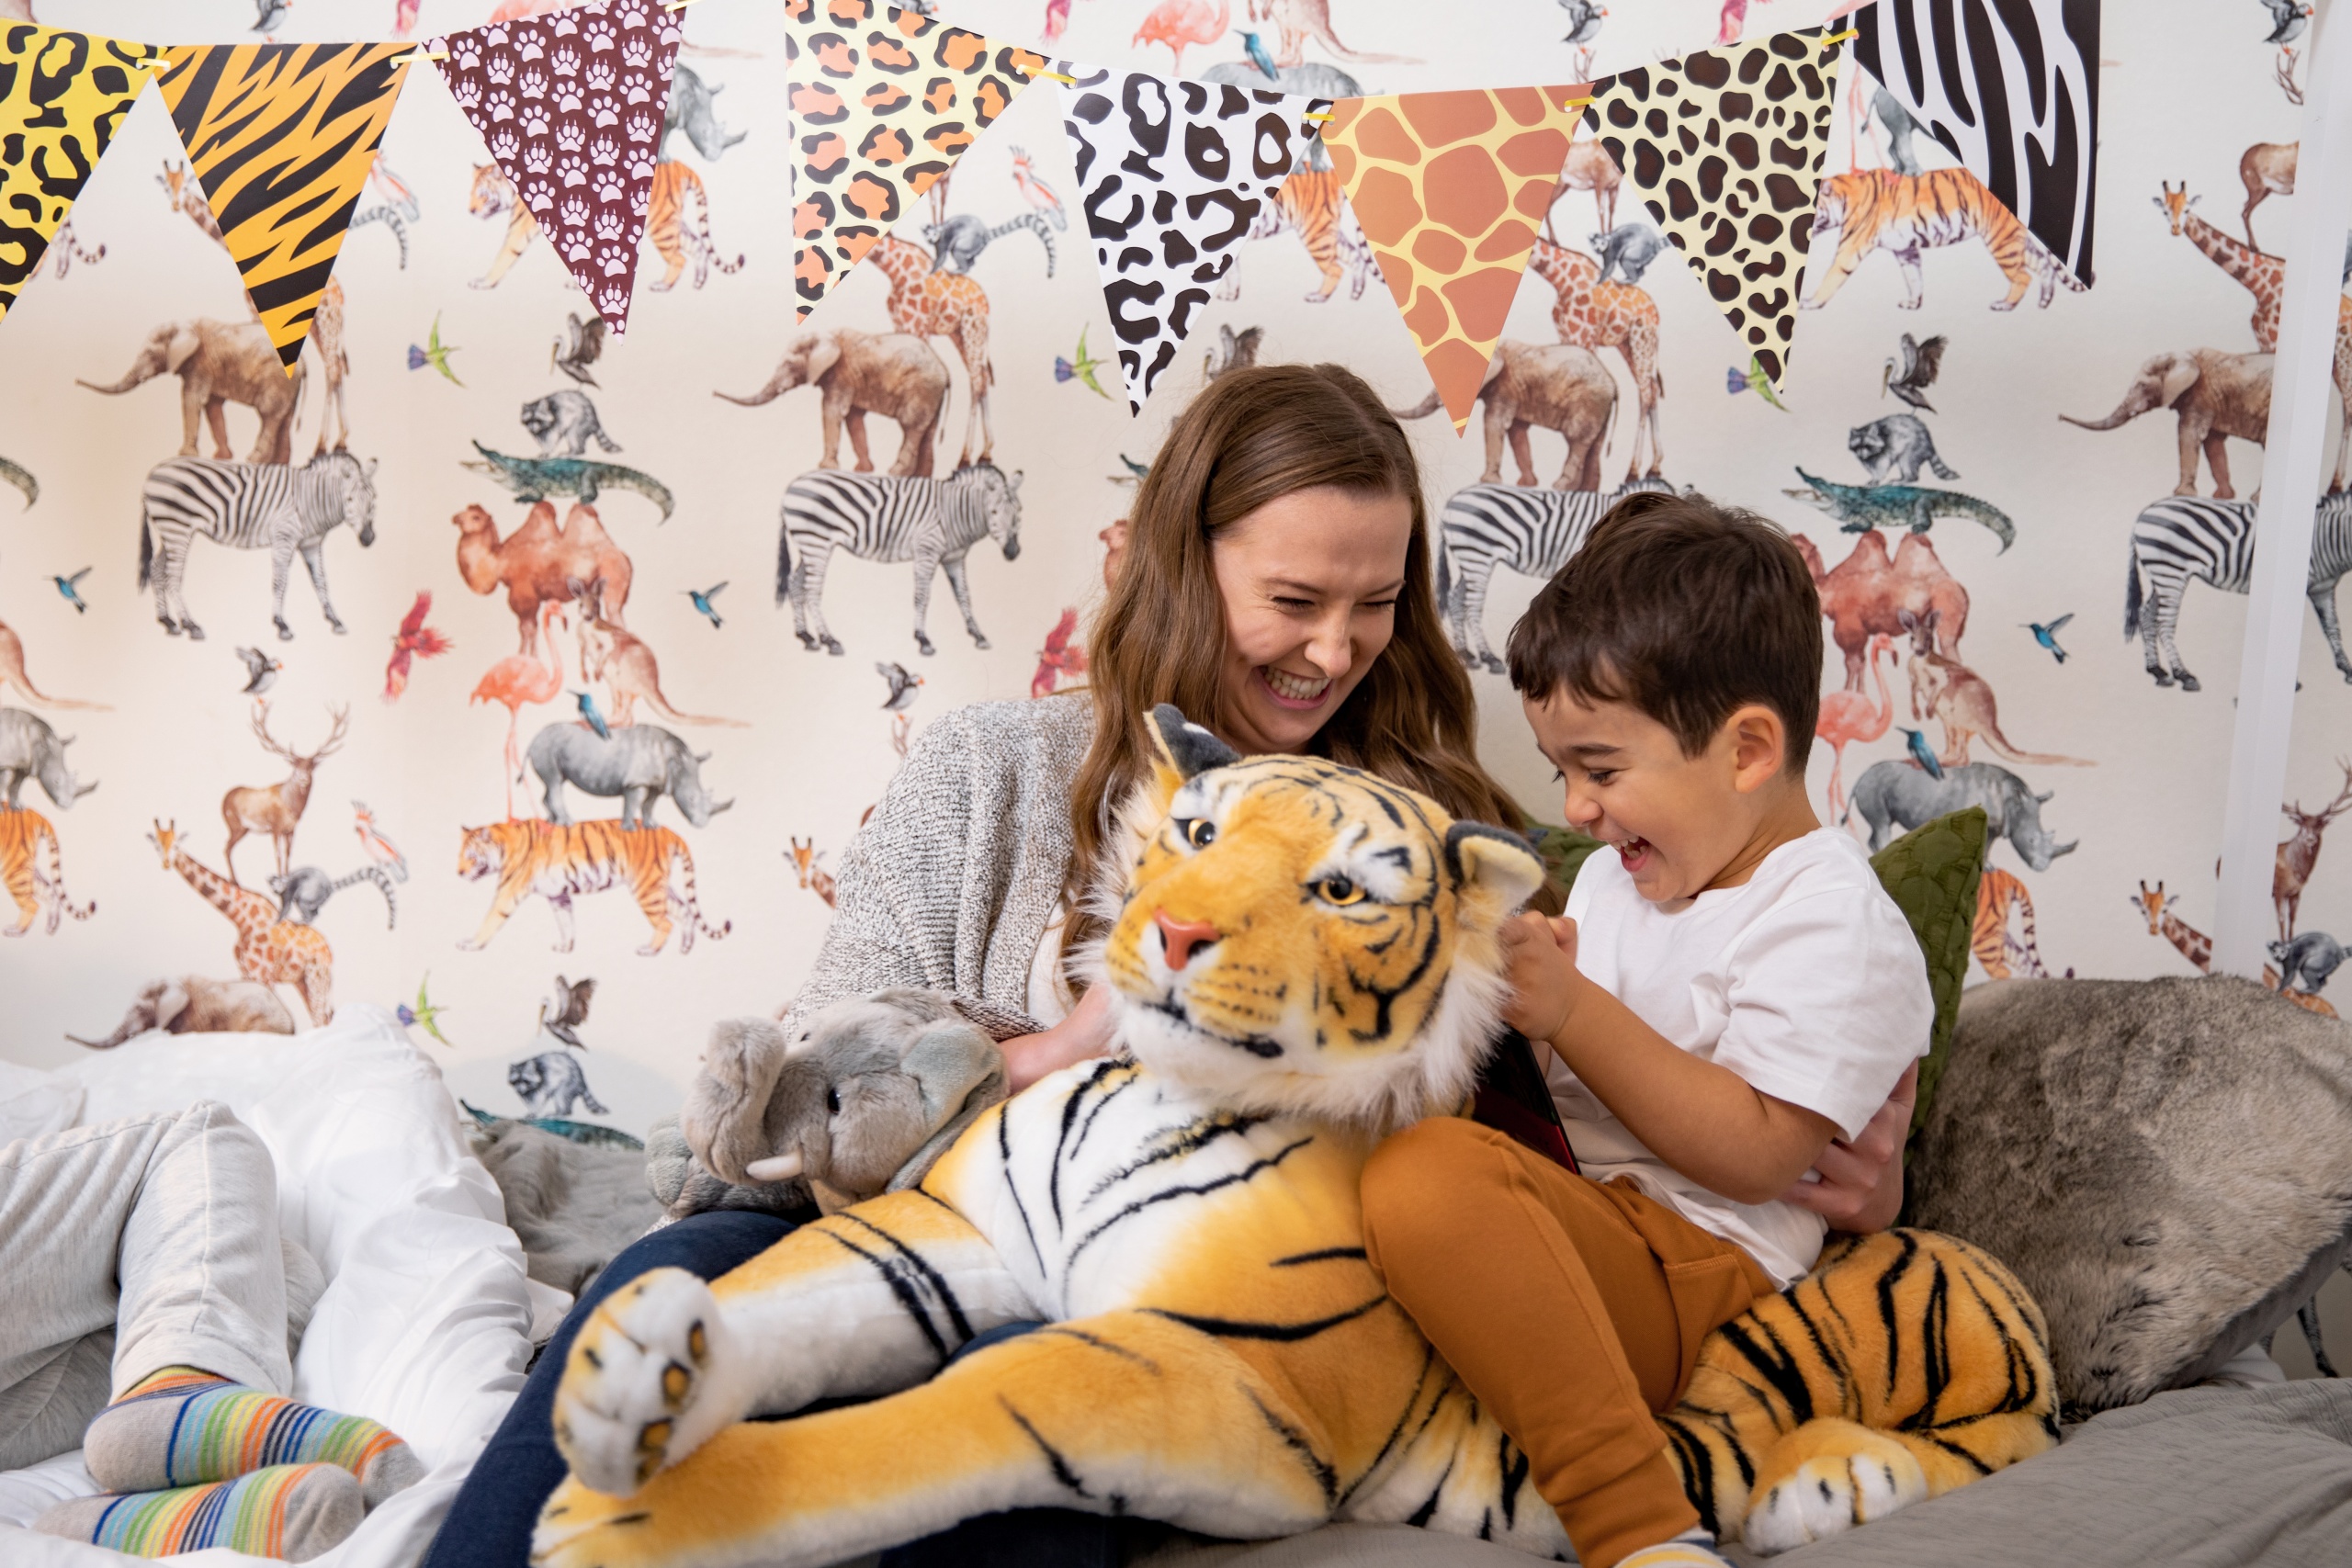 A mother and son on a bed playing with a stuffed animal tiger toy